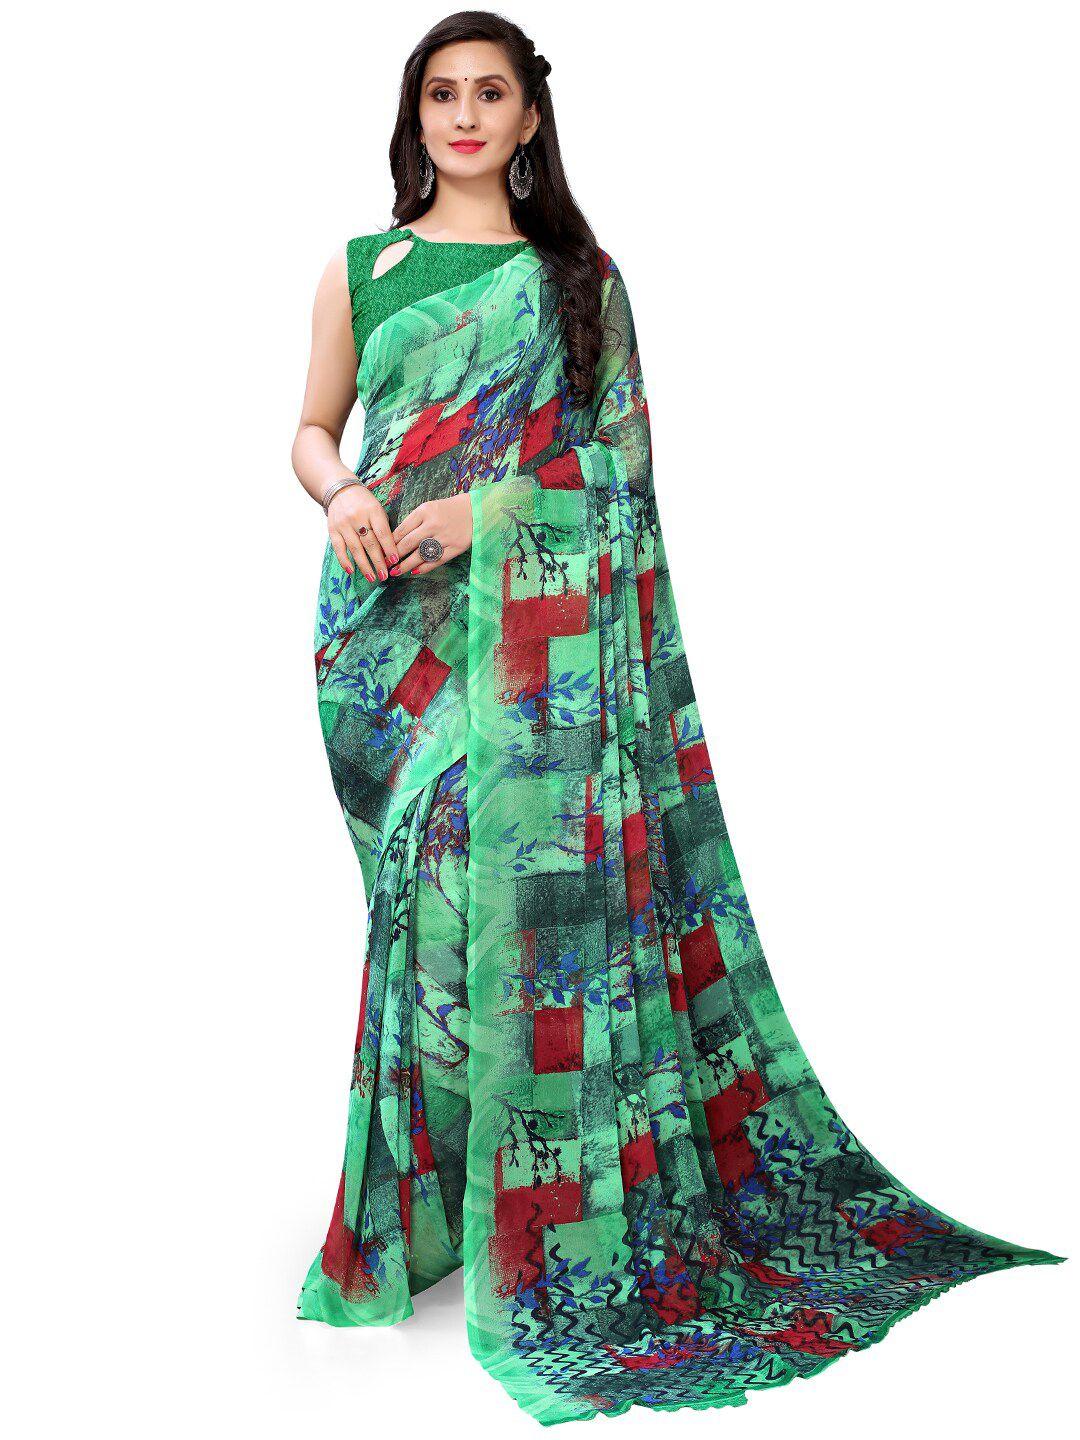 hritika abstract printed pure georgette saree